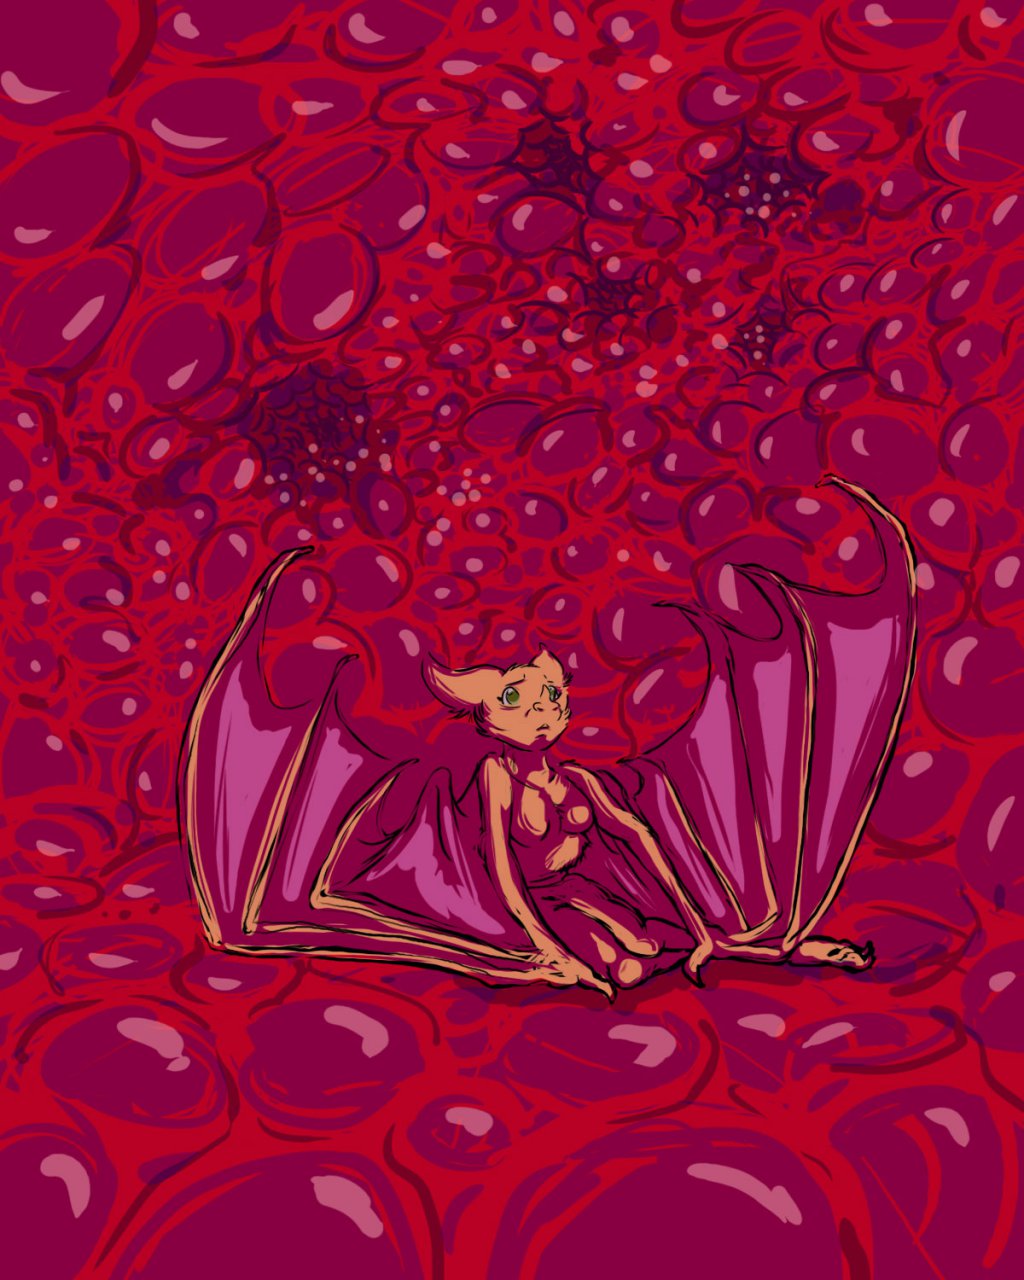 Passiflora in the Pomegranate Dimension by Kaput Otter